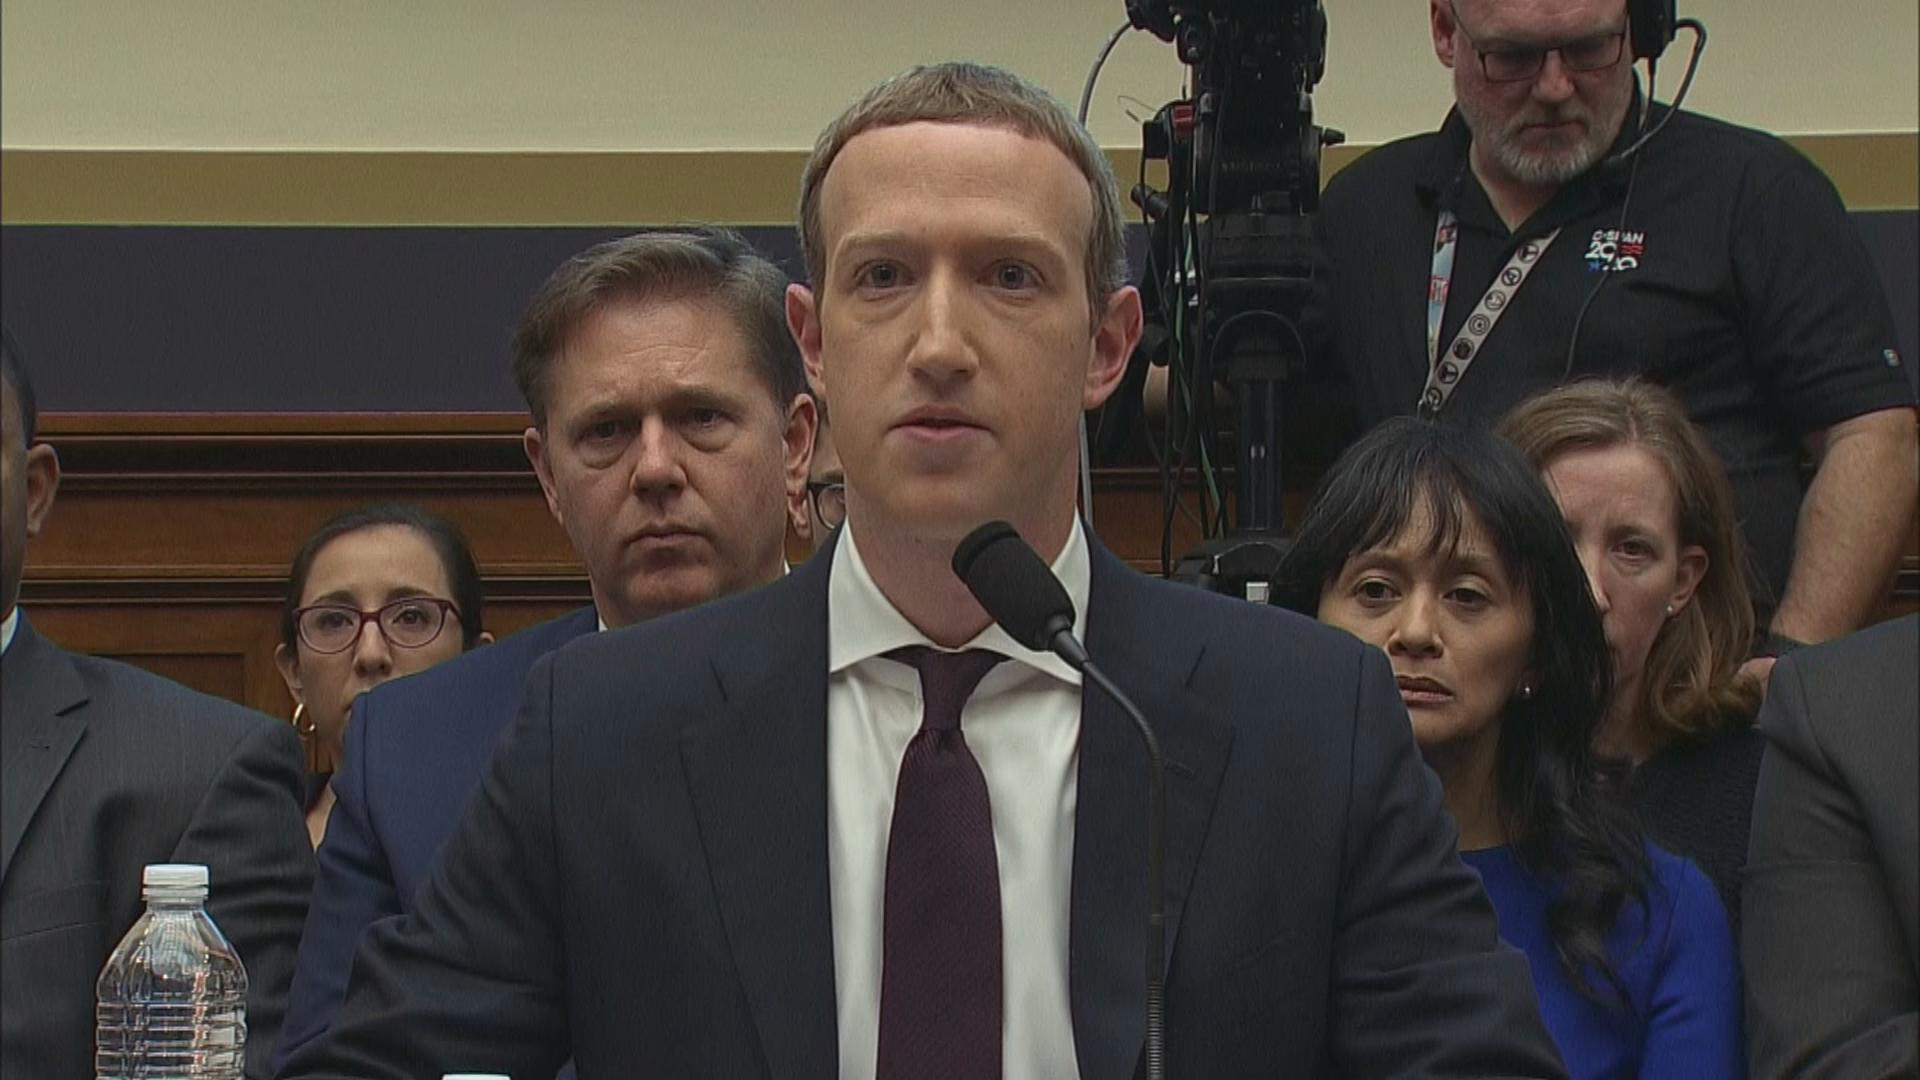 Facebook CEO Mark Zuckerberg testifies before the House Committee on Financial Services on Wednesday, Oct. 23, 2019. (WTTW News)